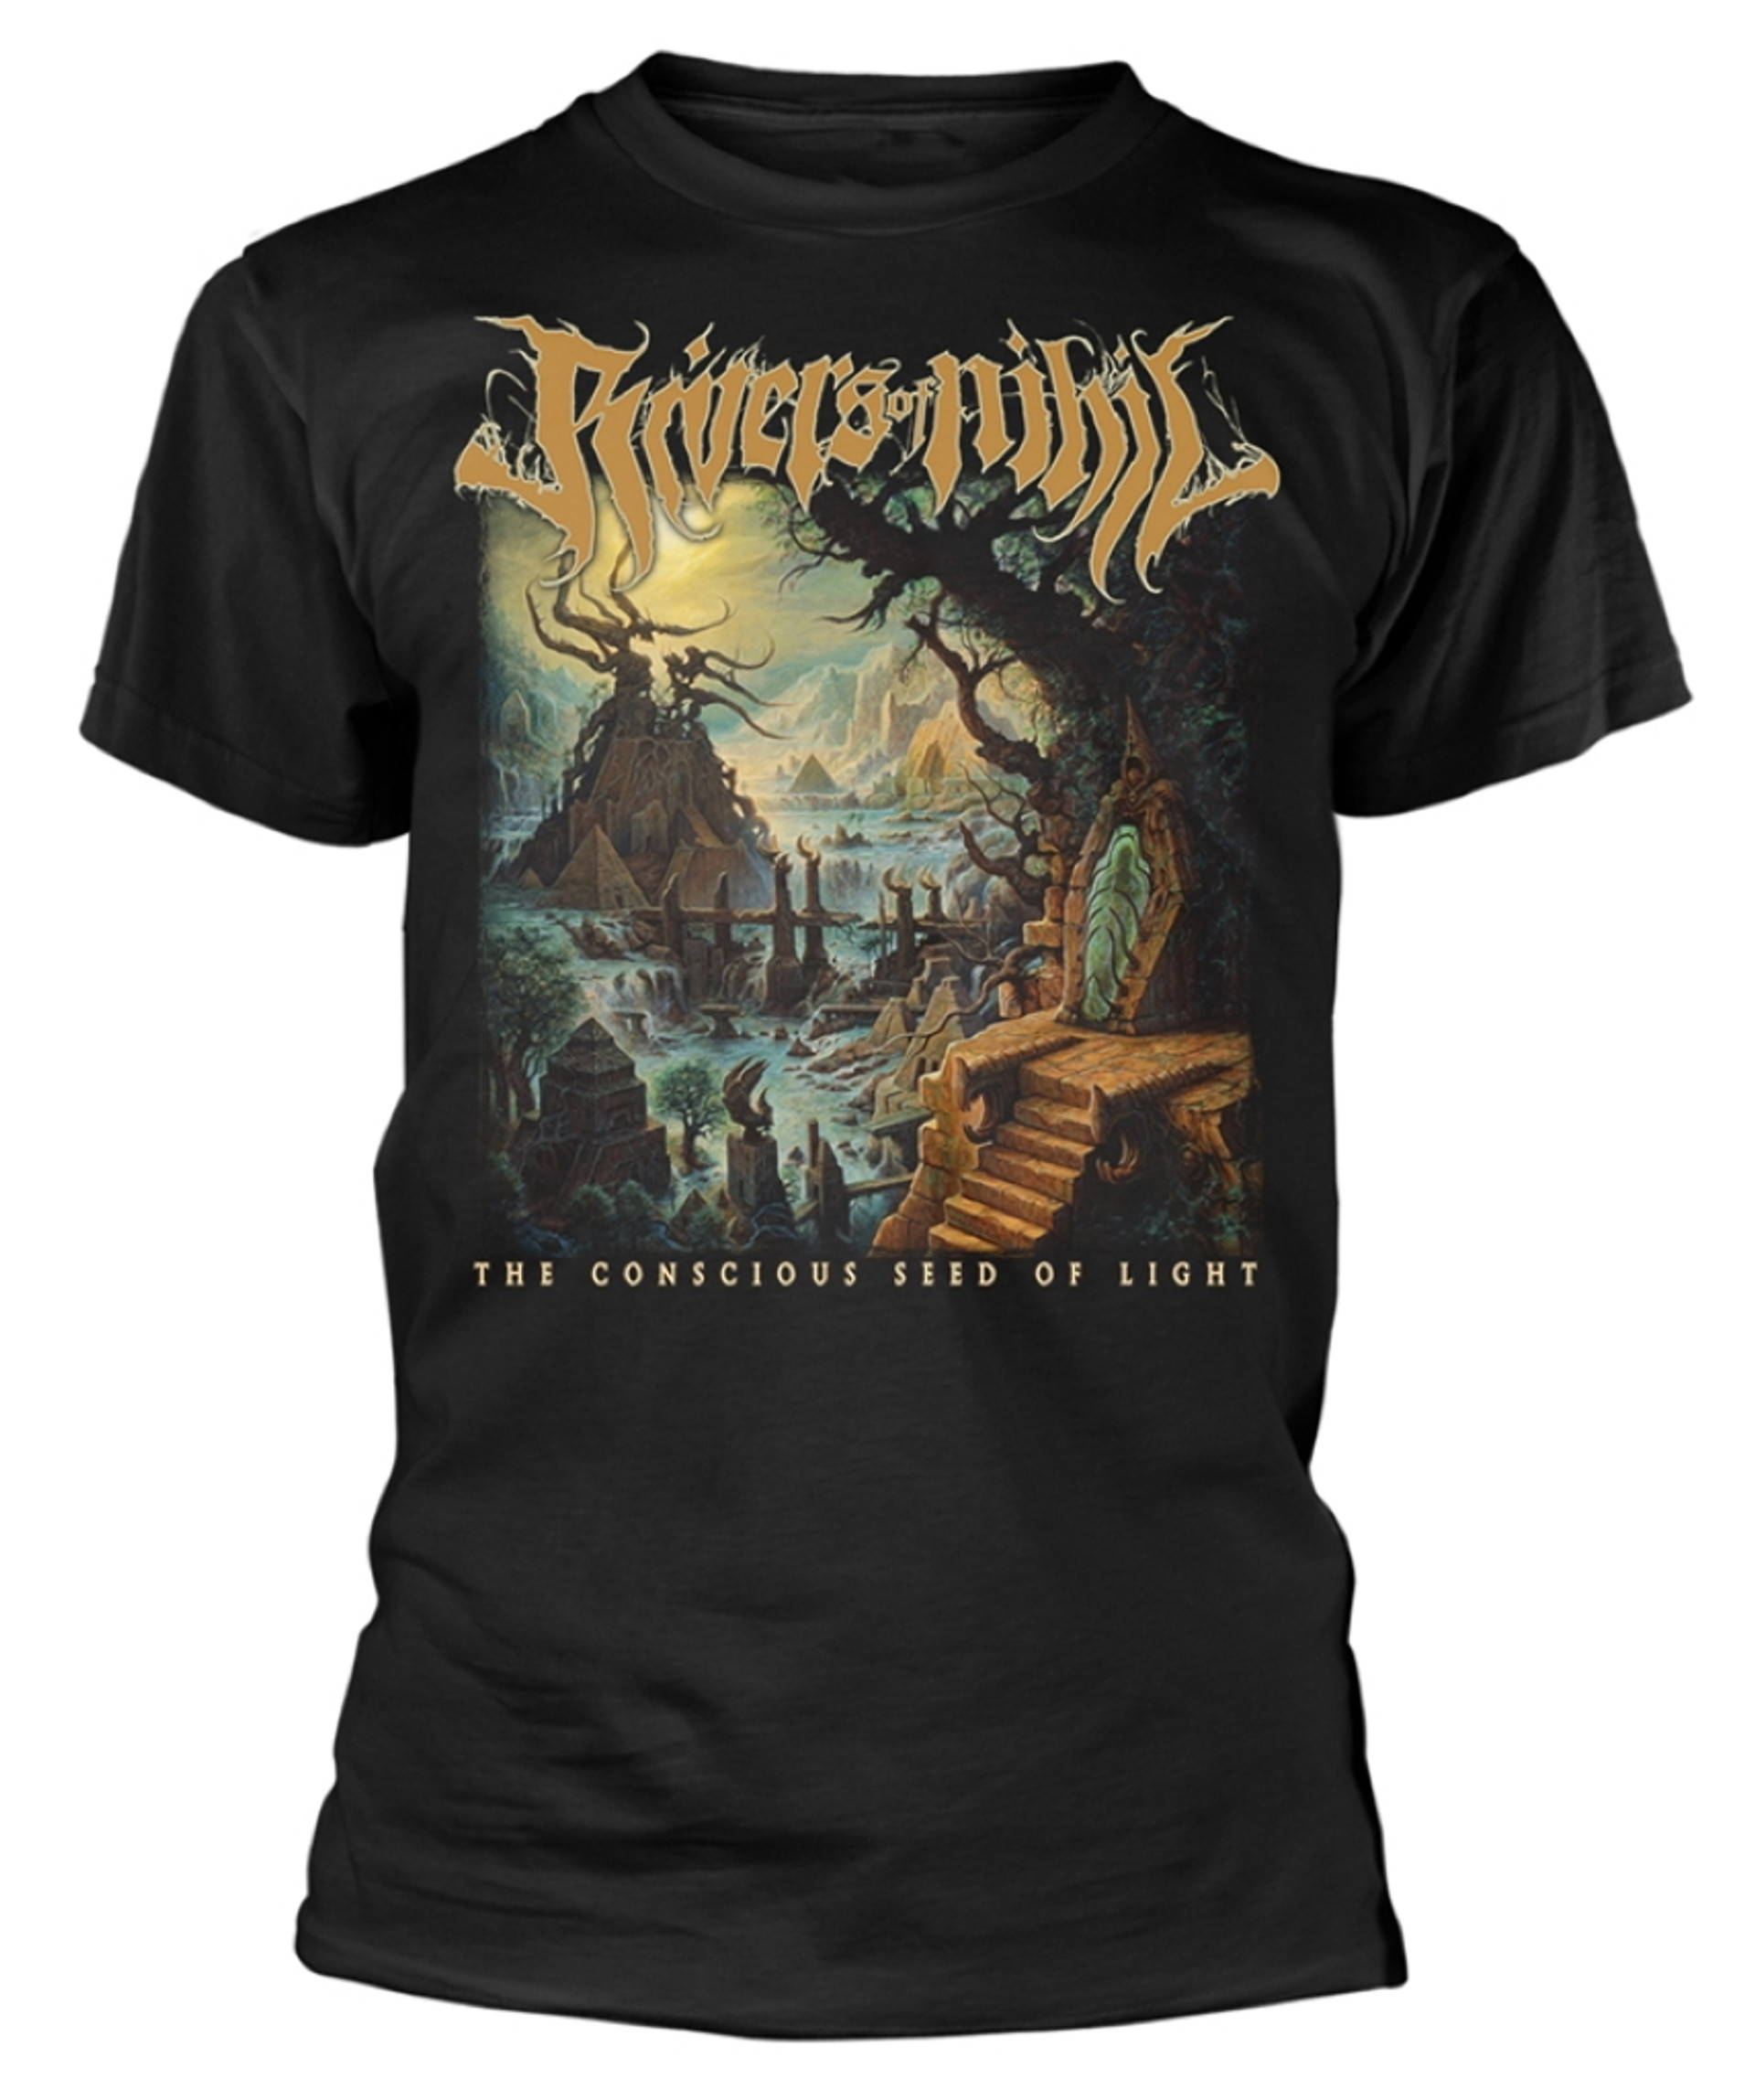 Rivers Of Nihil 'The Conscious Seed Of Light' (Black) T-Shirt | Eyesore ...